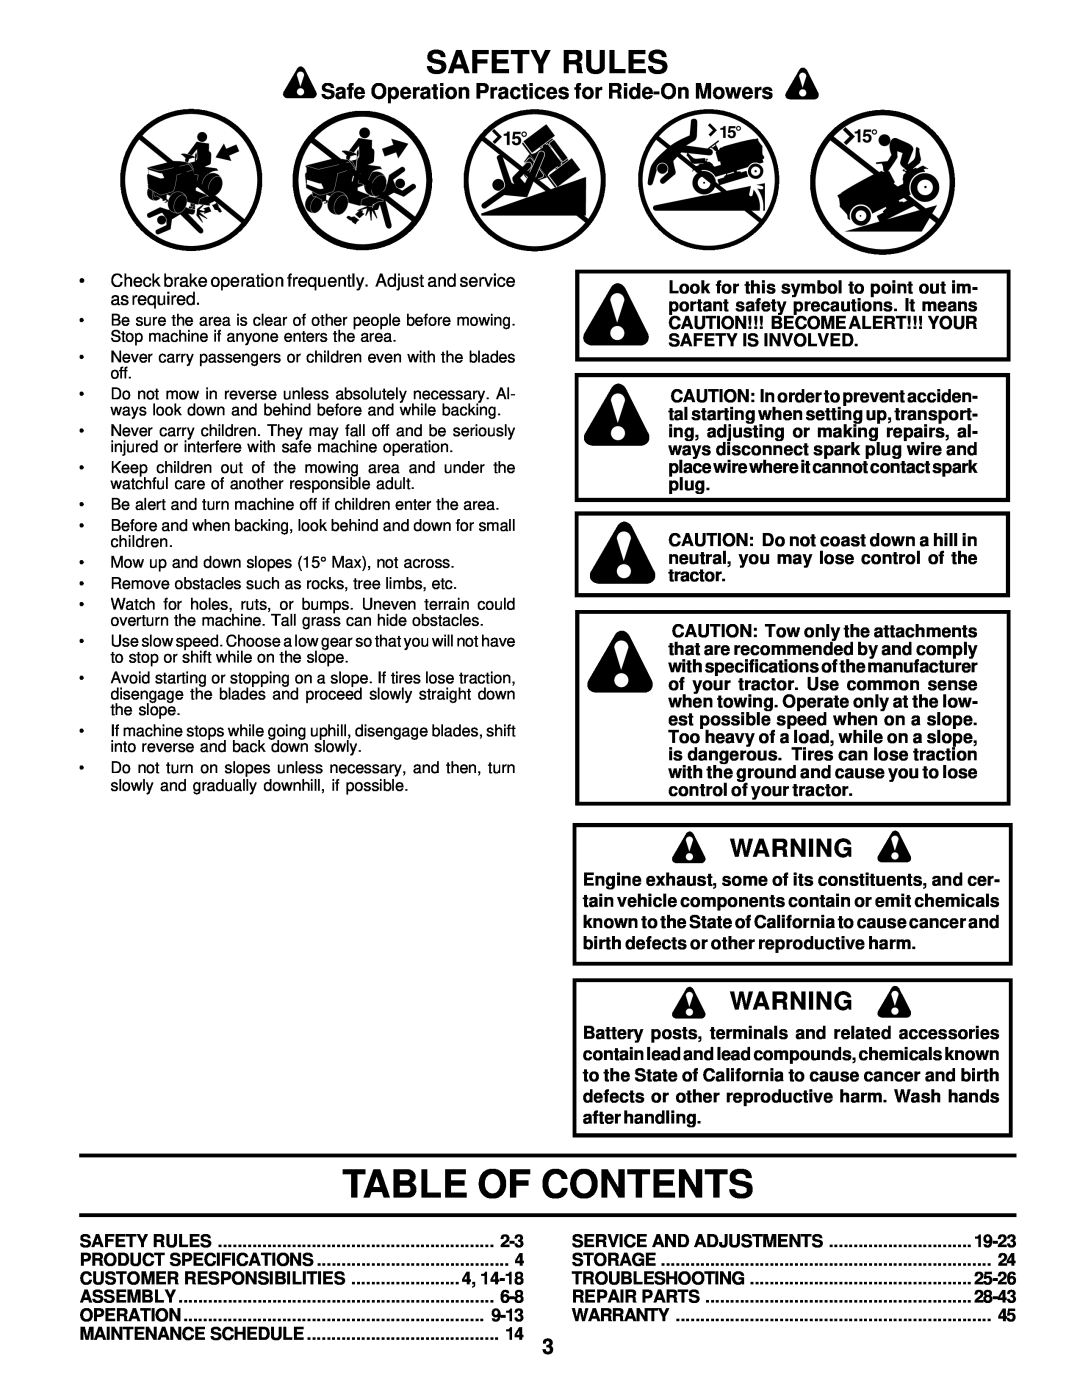 Poulan 176851 owner manual Table Of Contents, Safety Rules, Safe Operation Practices for Ride-On Mowers 